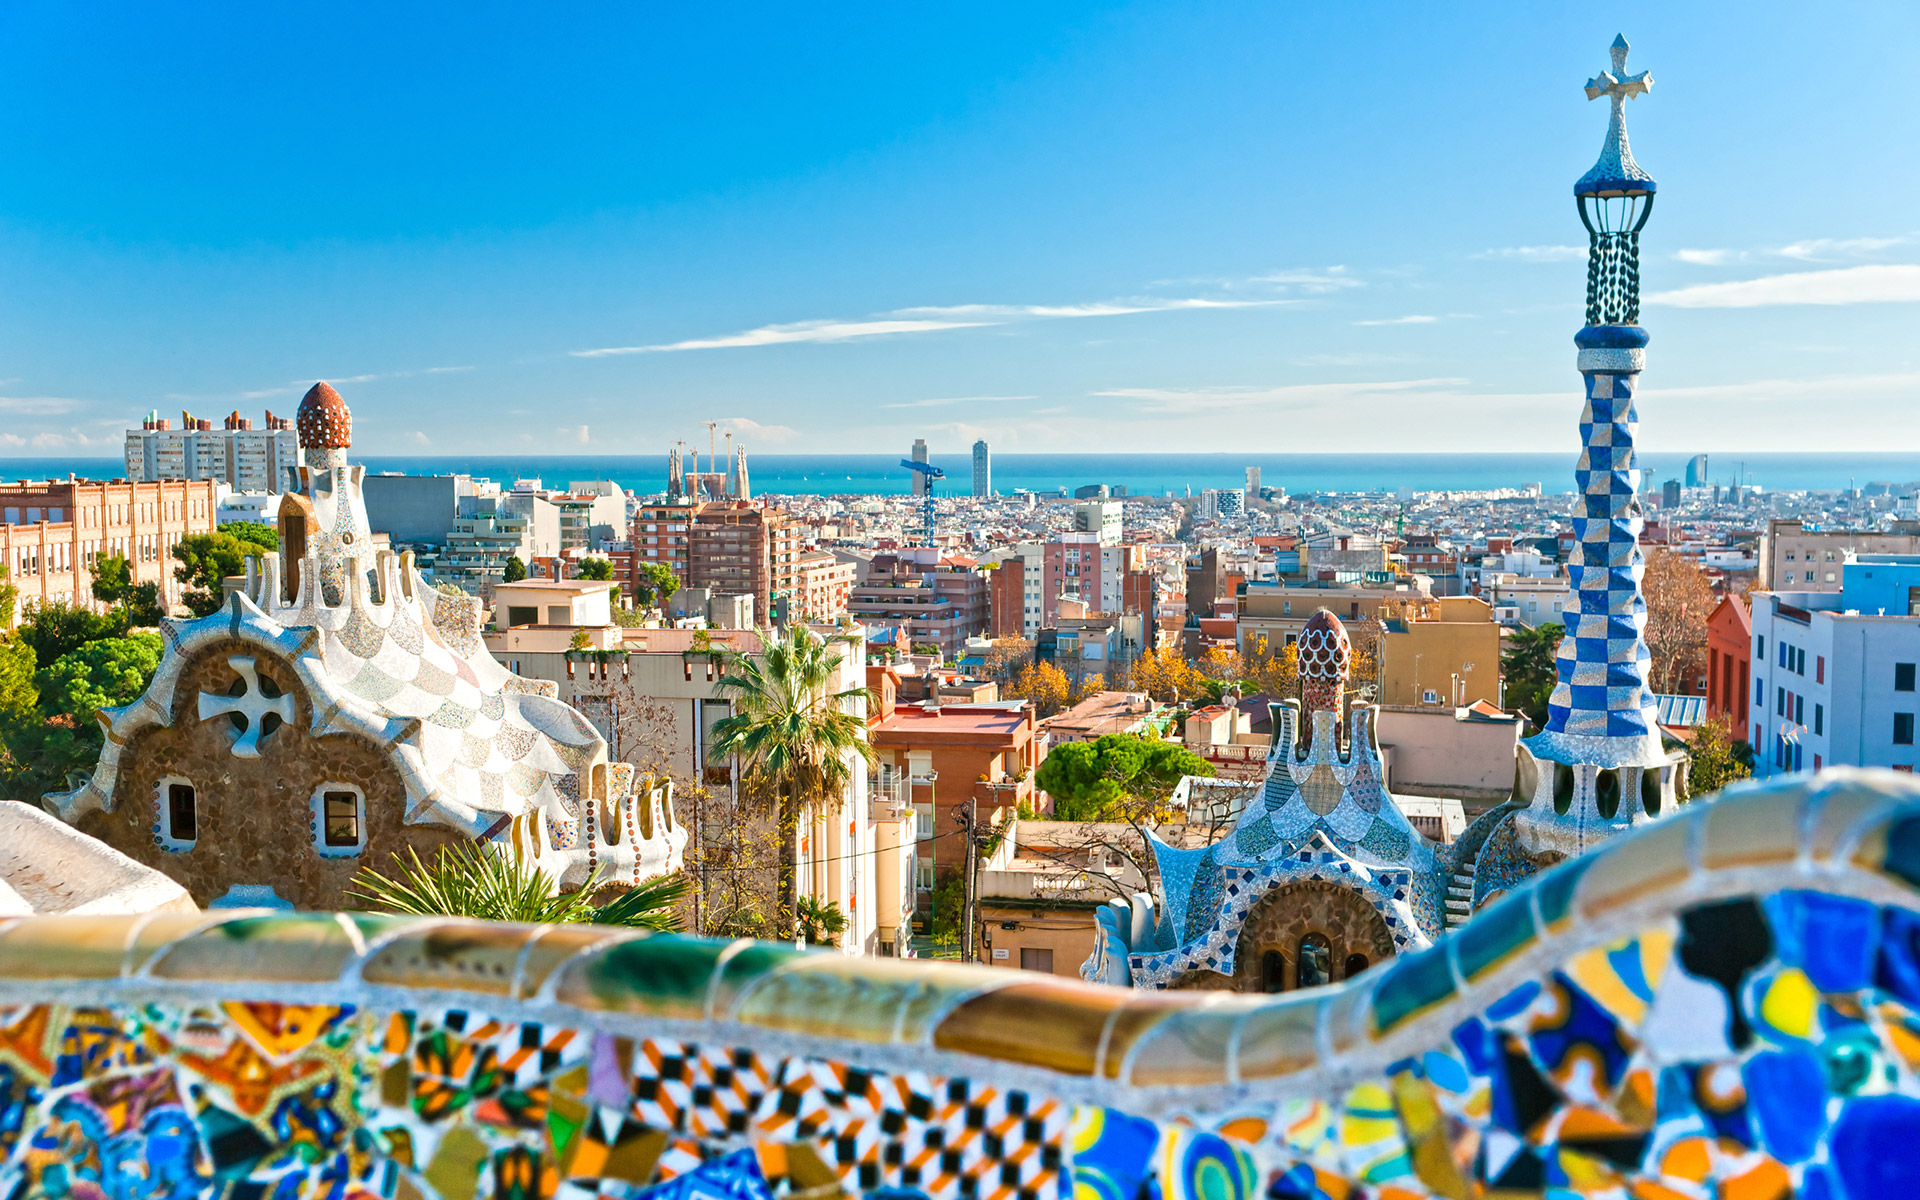 Download this Barcelona City Tour picture